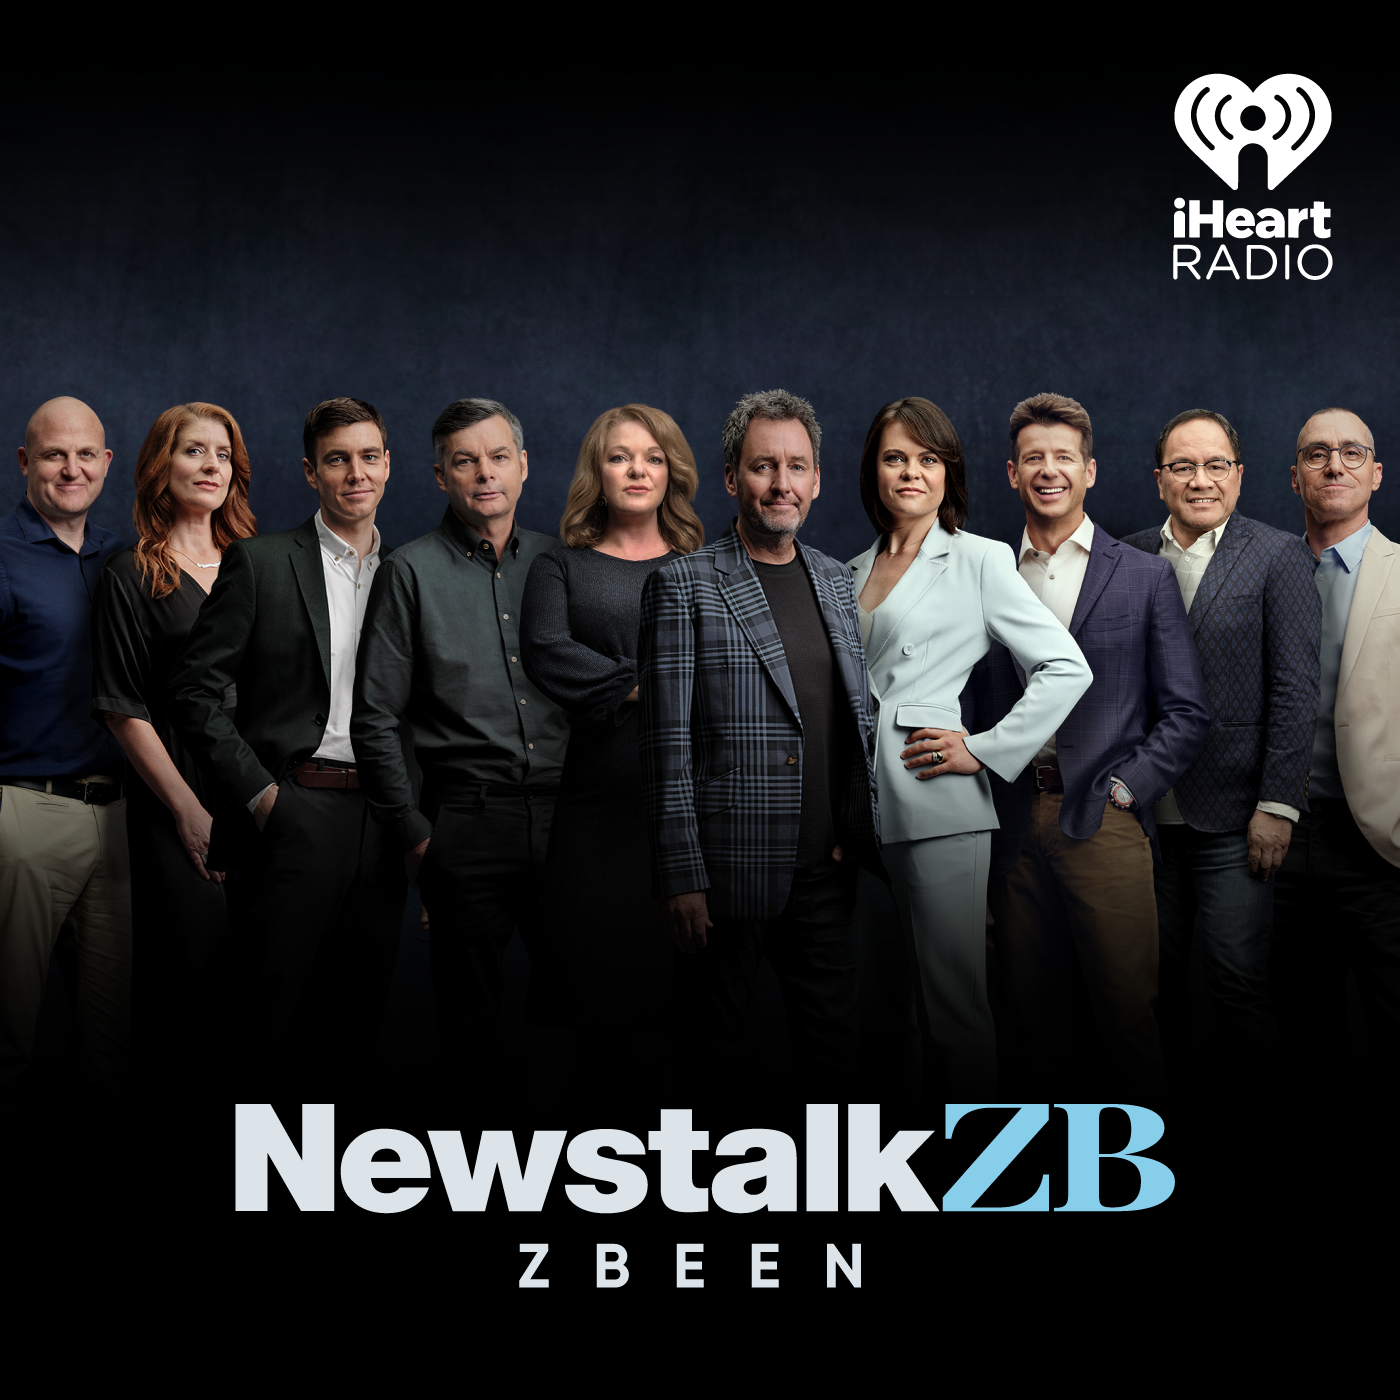 NEWSTALK ZBEEN: Whose Side Are You On?